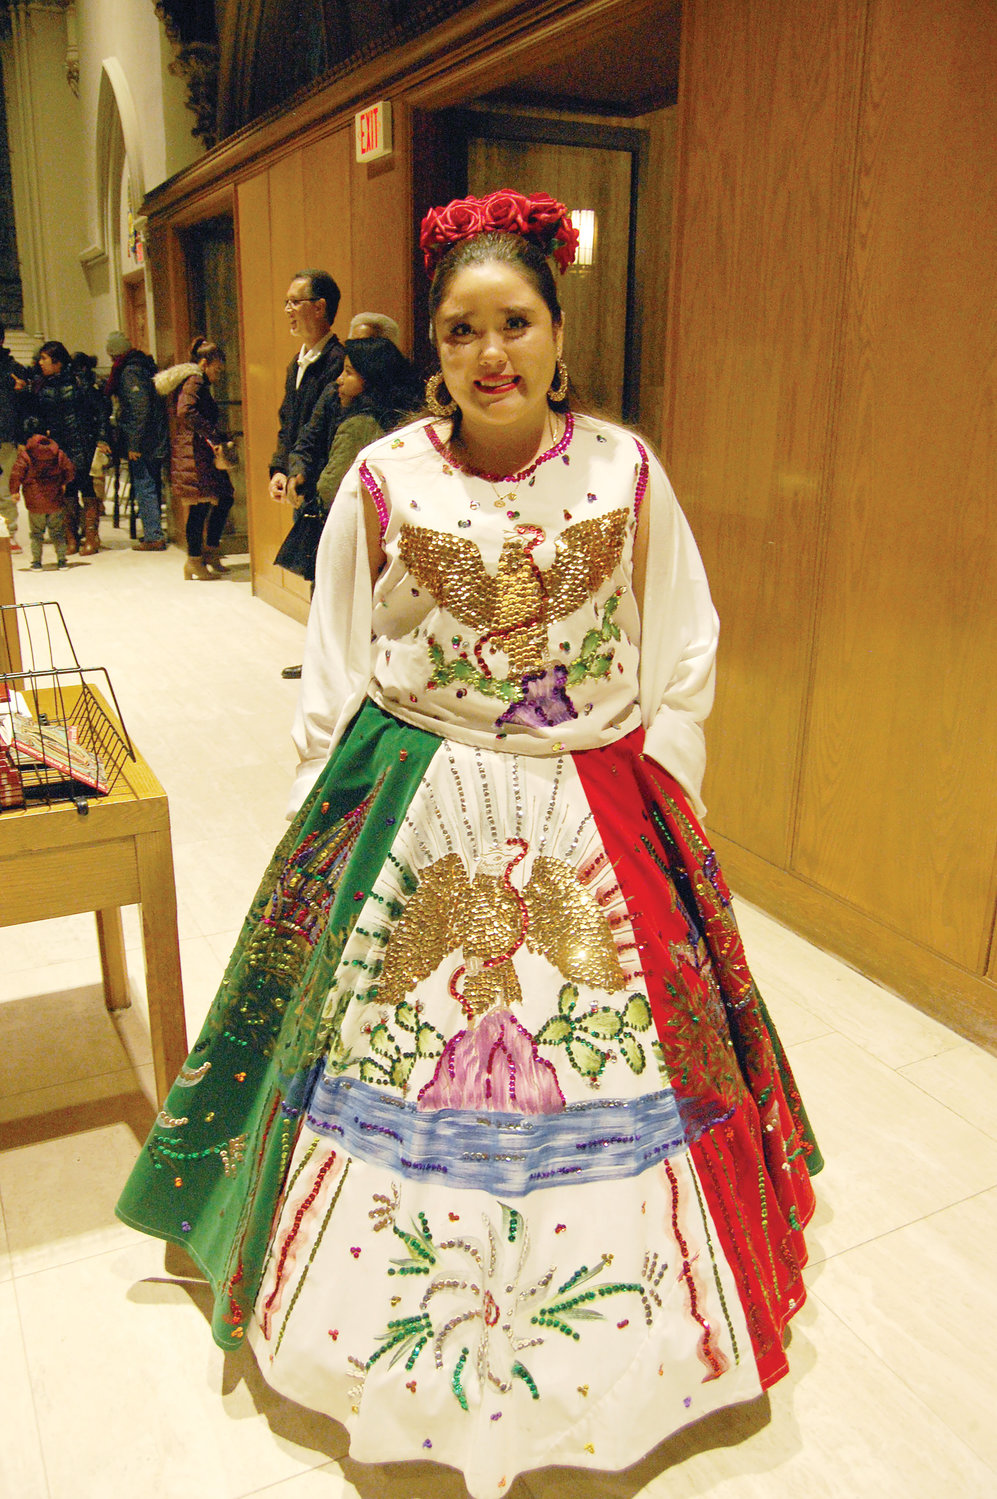 Paola Cruz in a traditional Mexican dress.